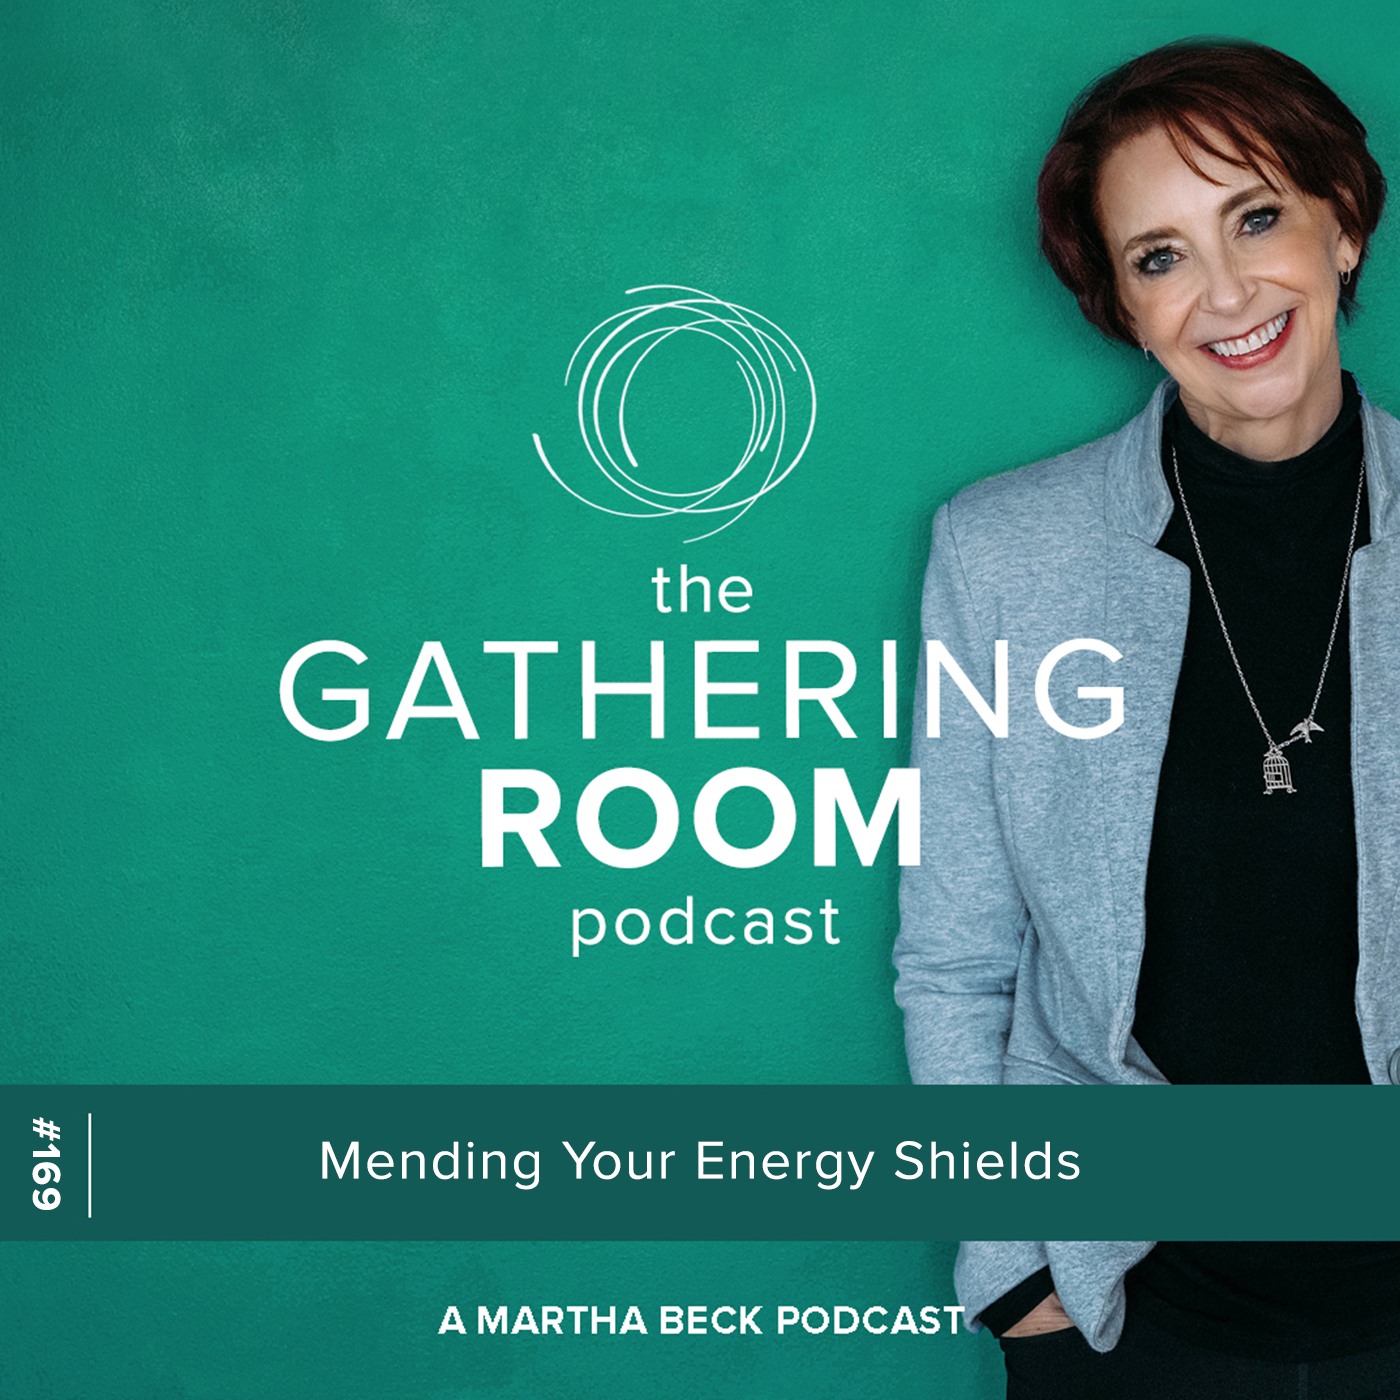 Image for The Gathering Pod A Martha Beck Podcast Episode #169 Mending Your Energy Shields